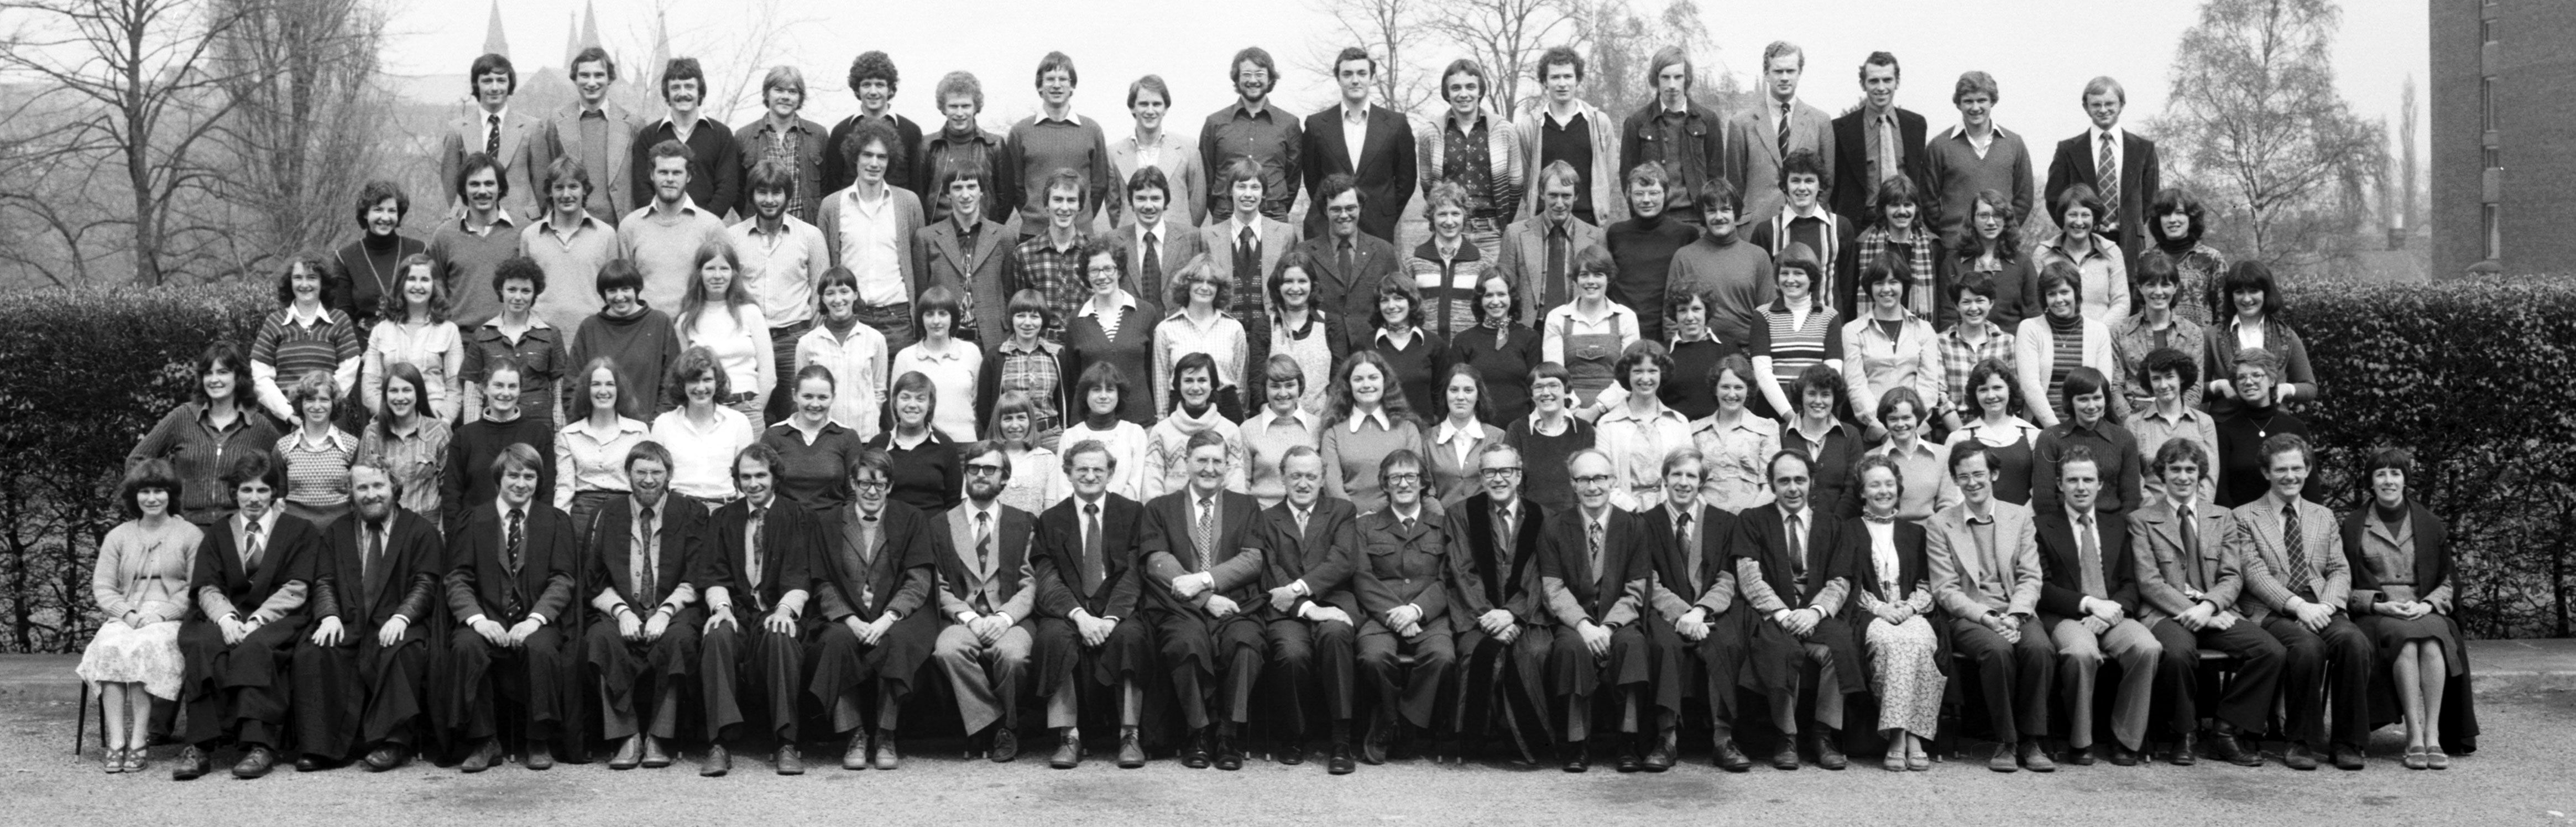 Geography Department Undergraduate Group photo from 1978